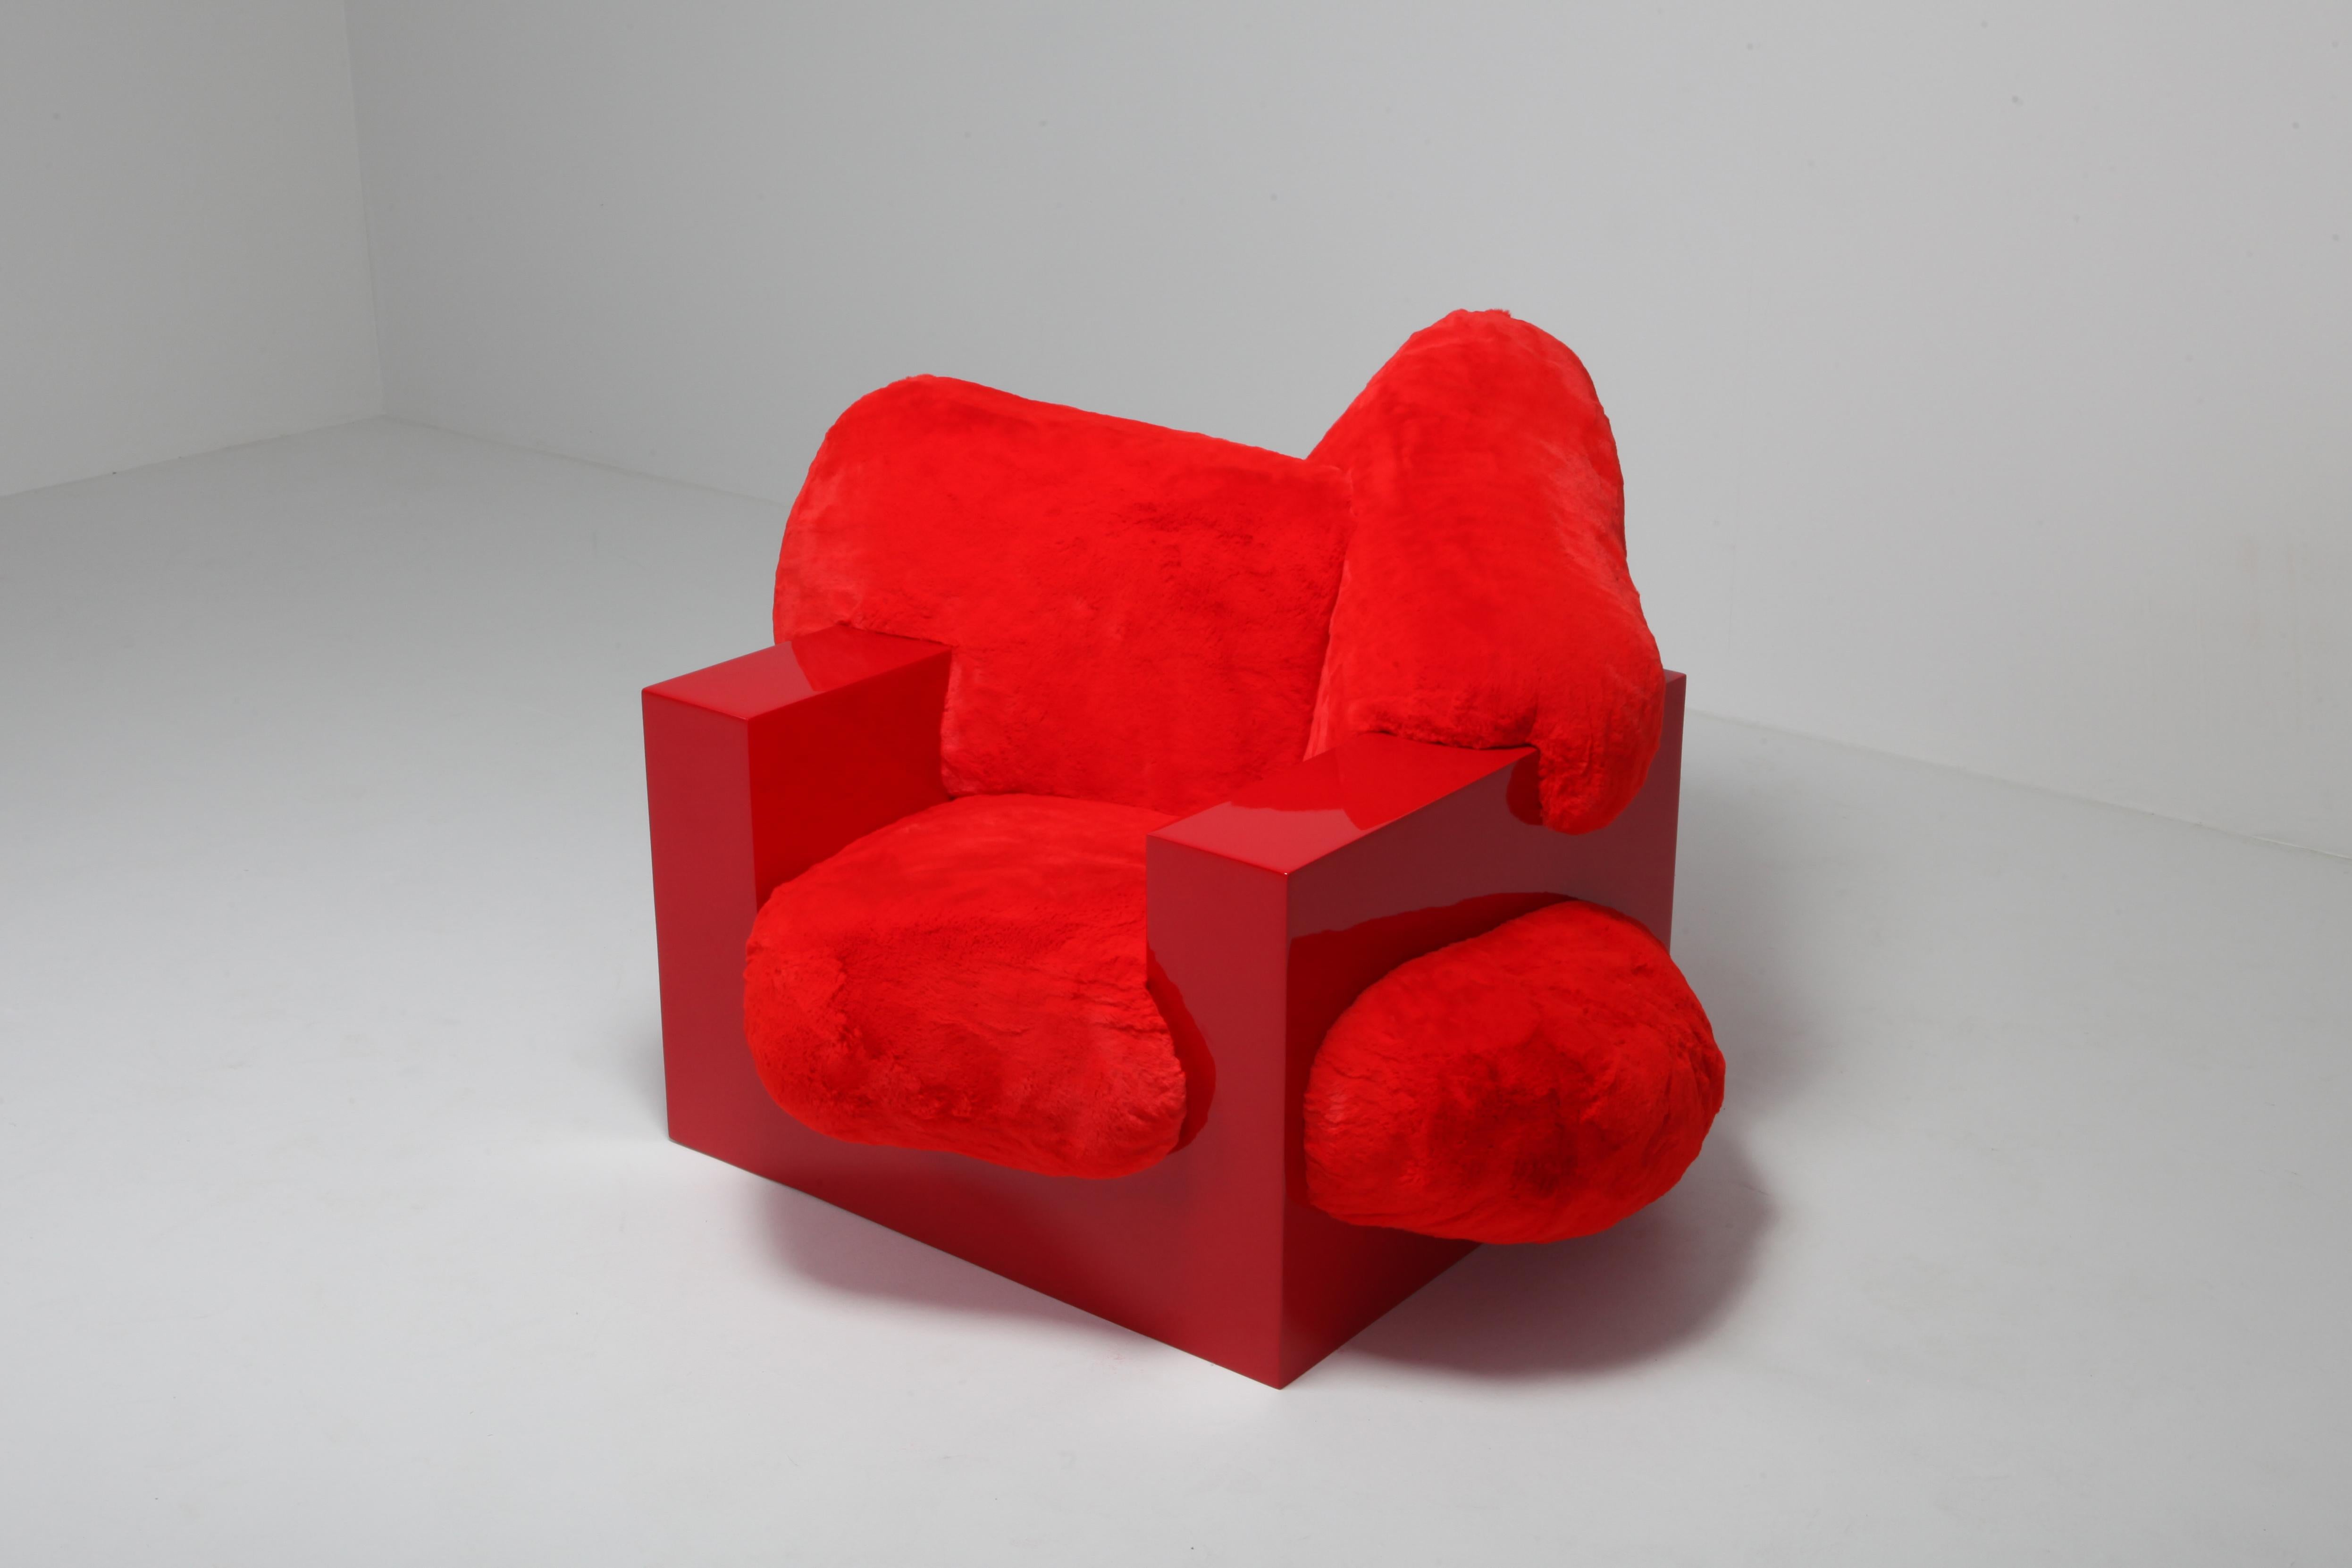 European 'Pillow Lounge Chair' in Red Lacquer and Faux Fur by Schimmel & Schweikle